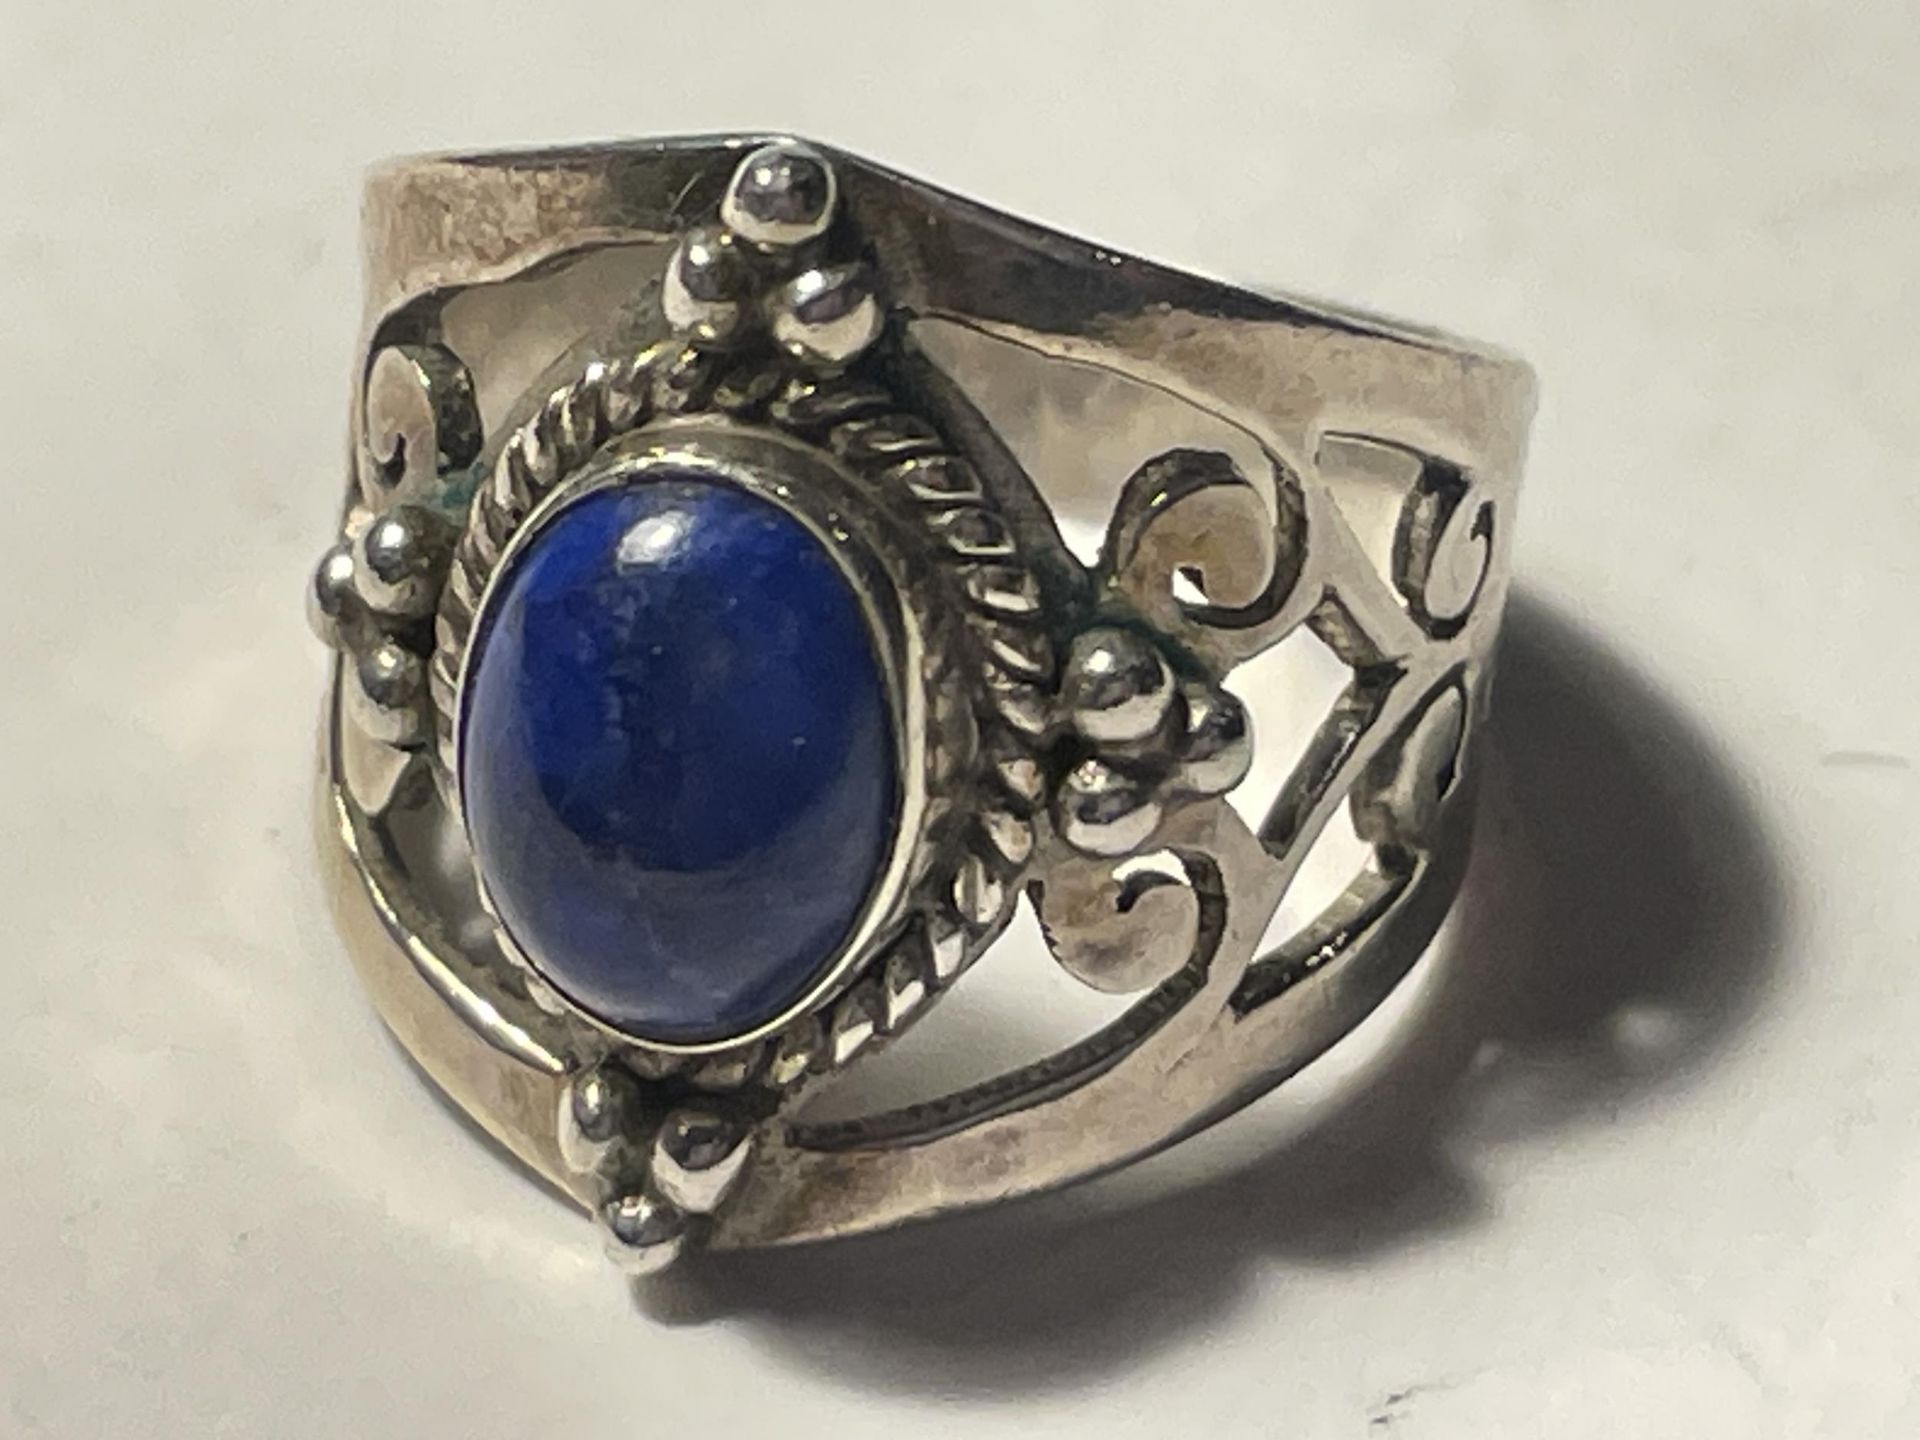 A SILVER DRESS RING WITH A BLUE CENTRE STONE IN A PRESENTATION BOX - Image 2 of 4